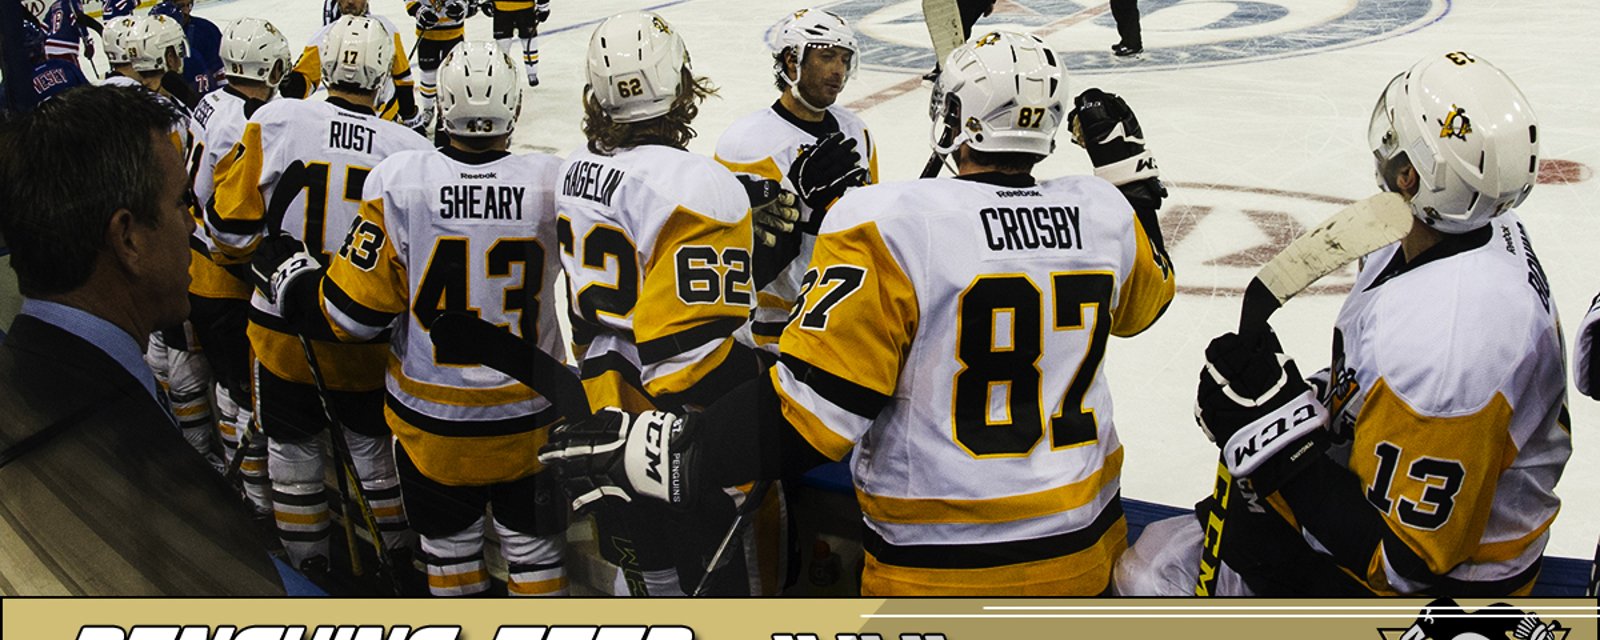 Good news for the Penguins!